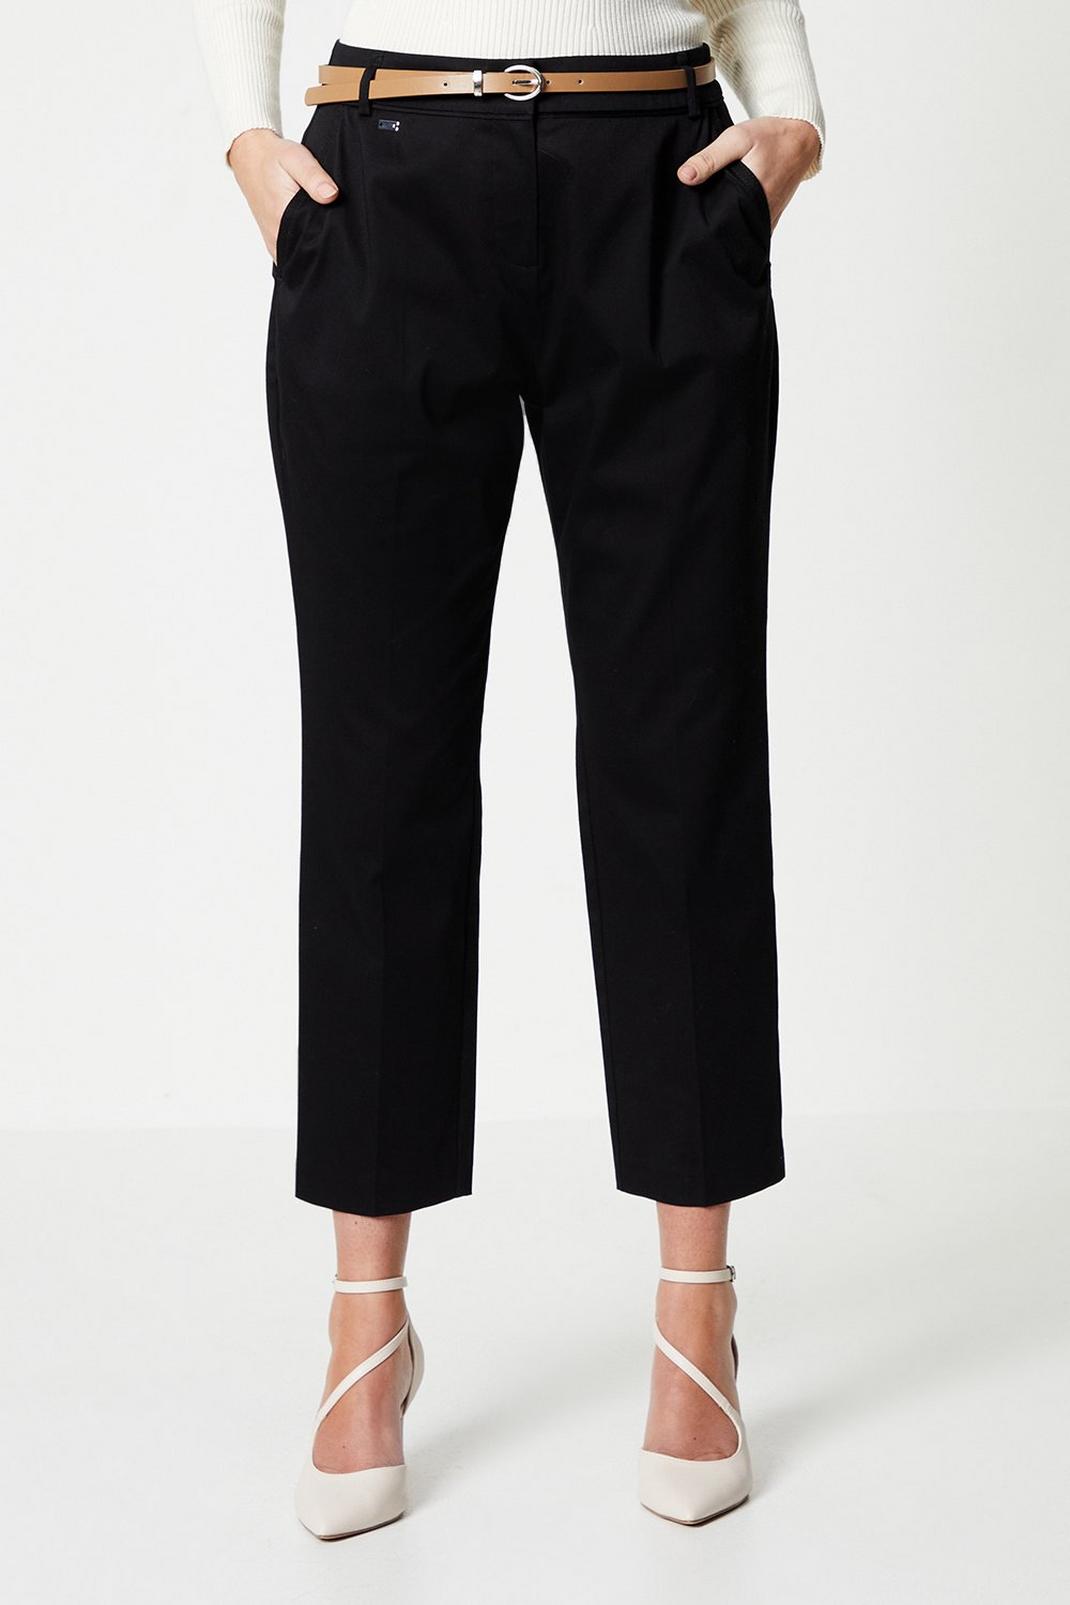 Black Petite Stretch Cigarette Belted Trousers image number 1